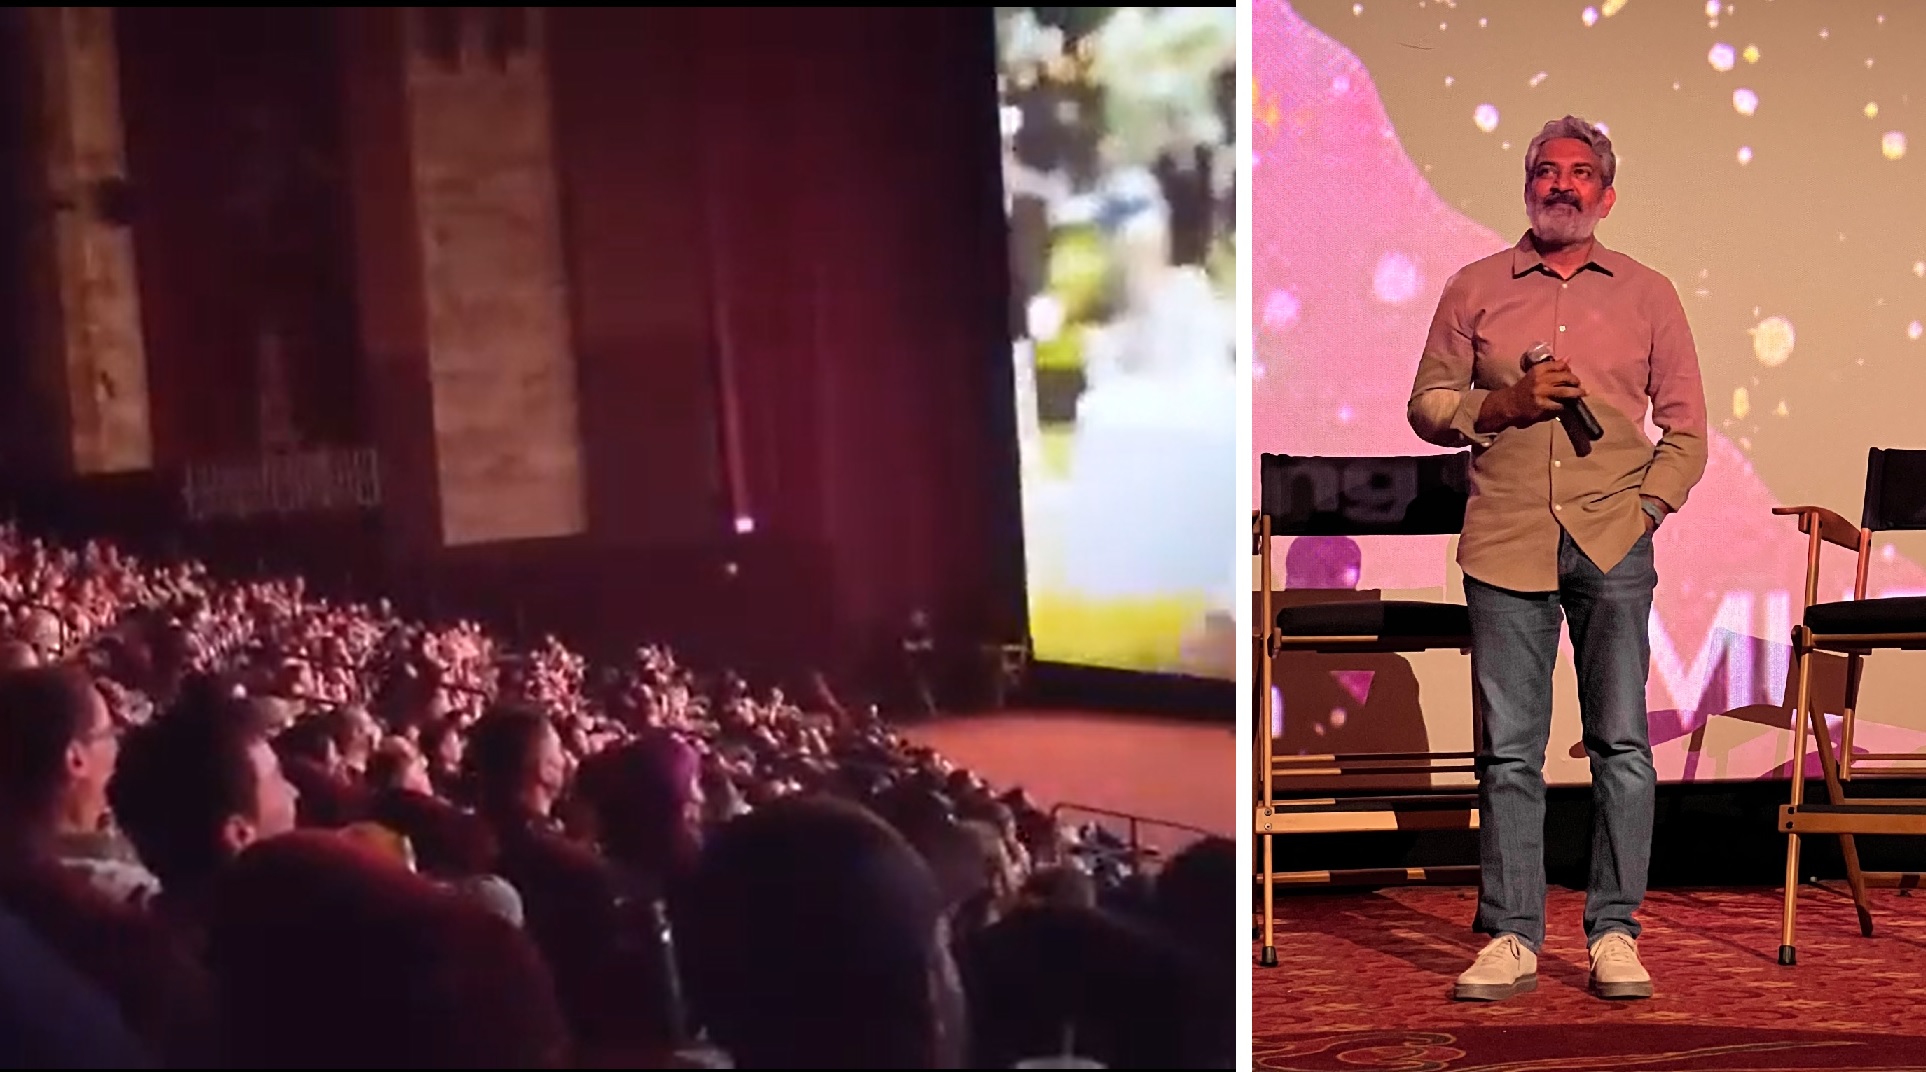 Theater Audience In United States Claps & Cheers Watching RRR, Rajamouli Gets Standing Ovation [Video]